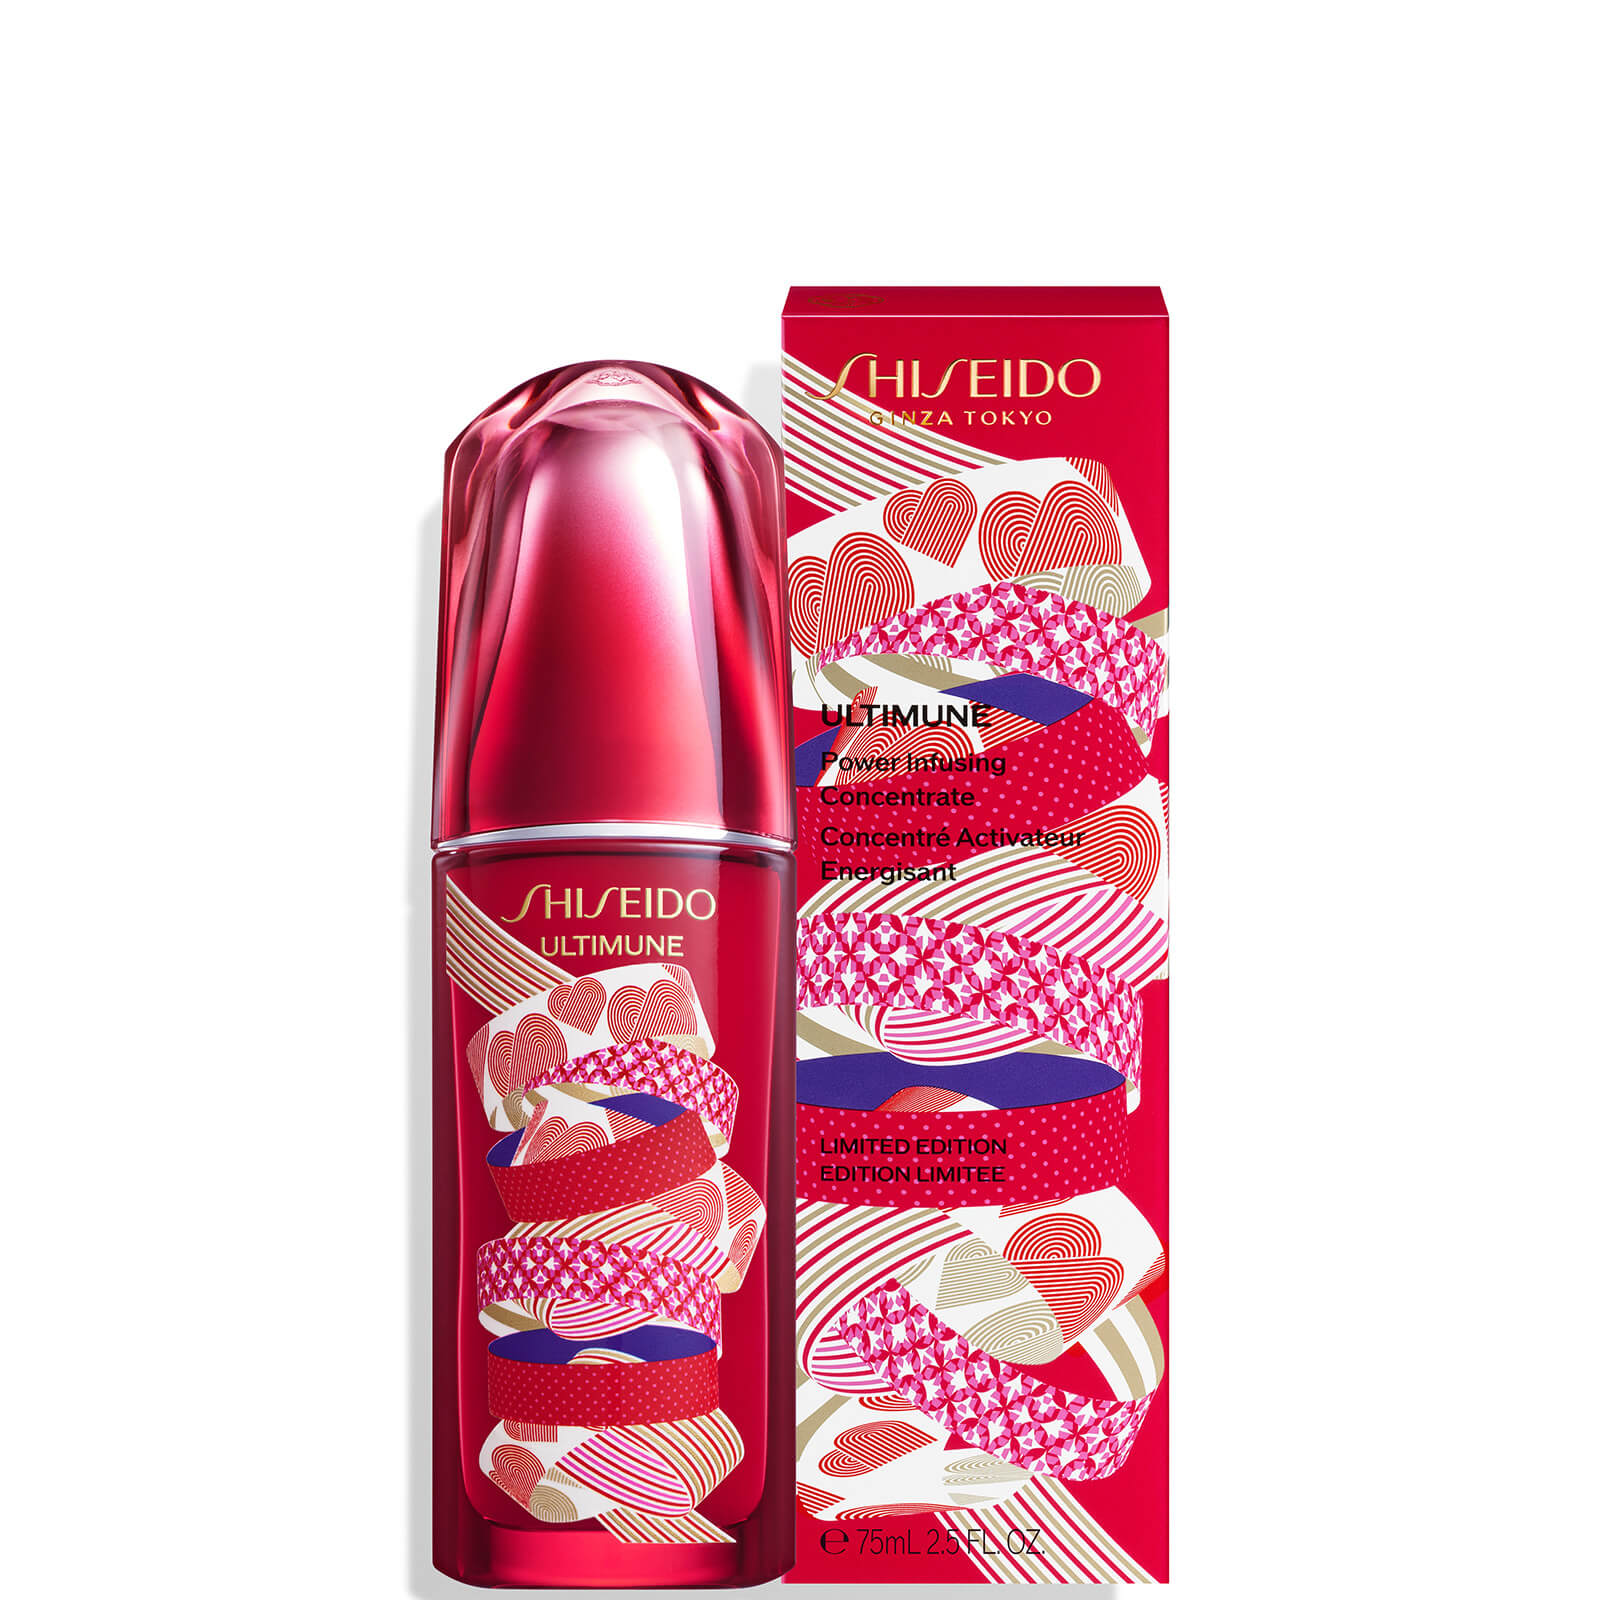 Shiseido Ultimune Power Infusing Concentrate Limited Edition (Various Sizes) - 75ml